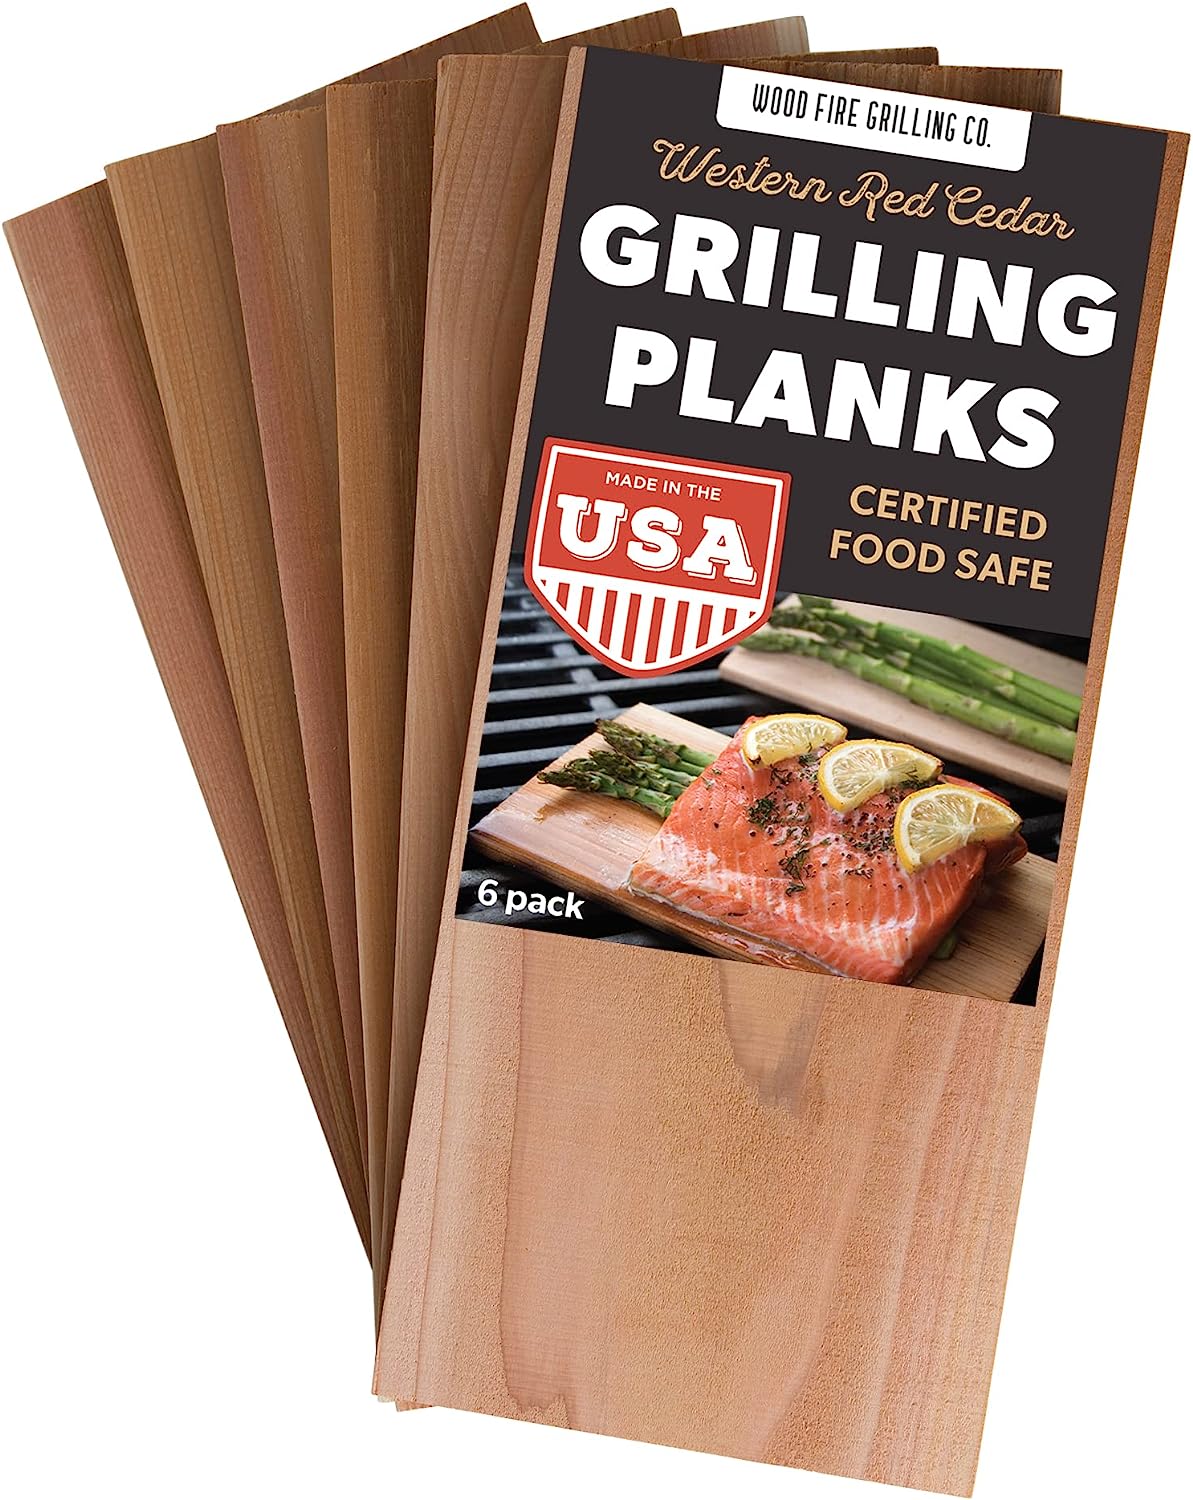 6 Pack Cedar Grilling Planks for Salmon and More. Sourced and Made in The USA.